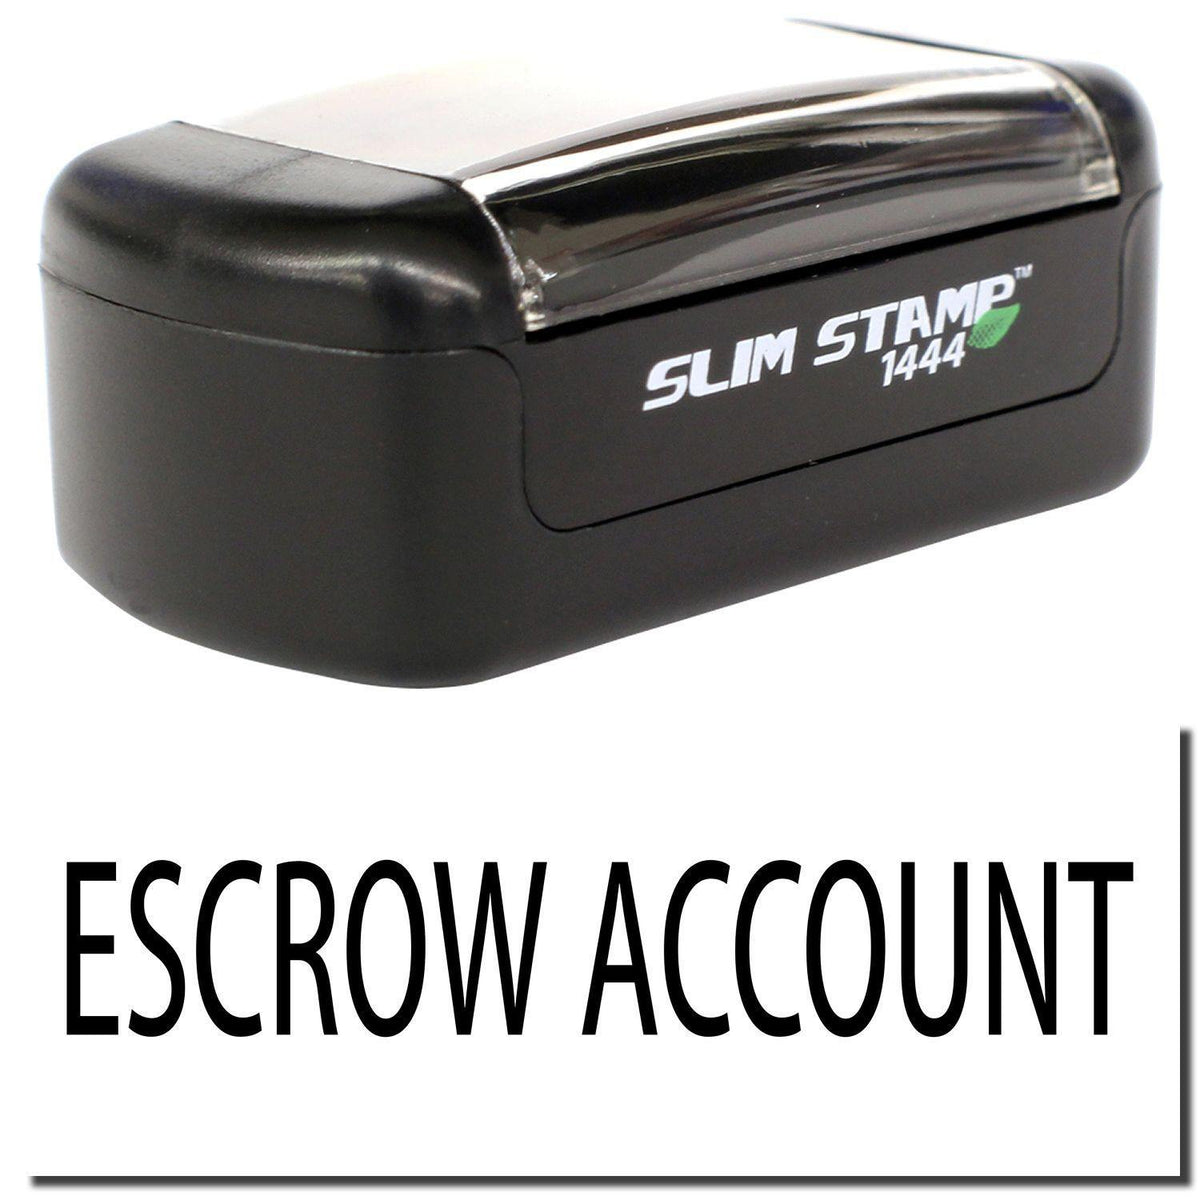 A stock office pre-inked stamp with a stamped image showing how the text &quot;ESCROW ACCOUNT&quot; is displayed after stamping.